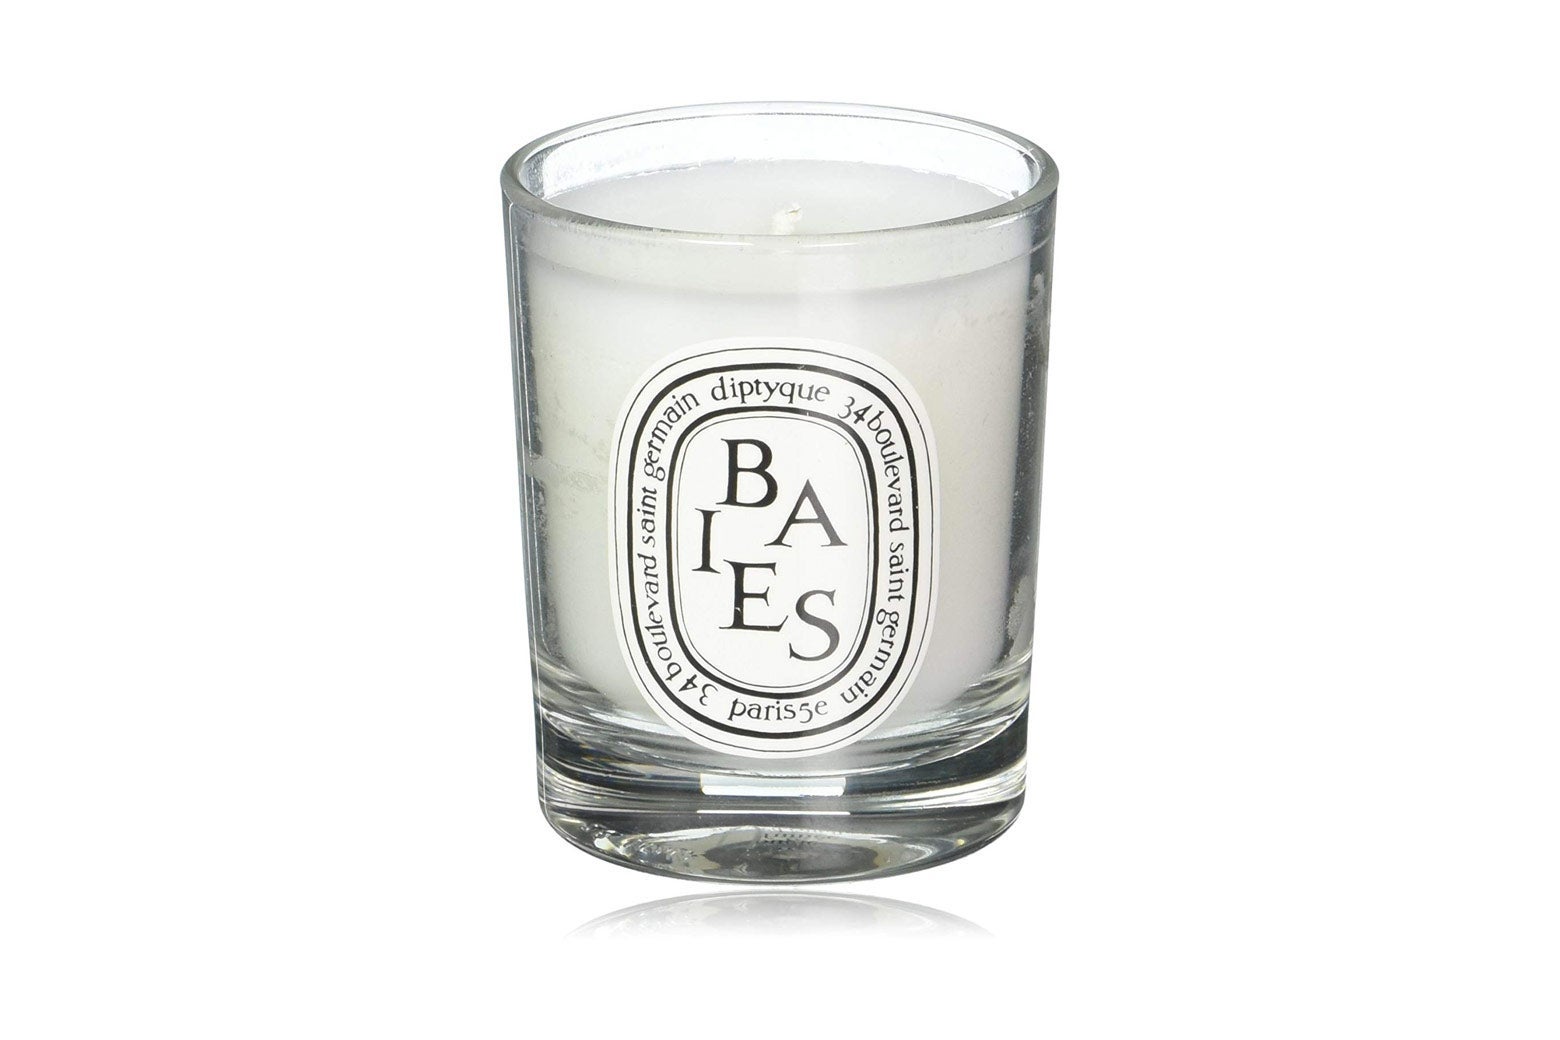 Diptyque Baies candle.